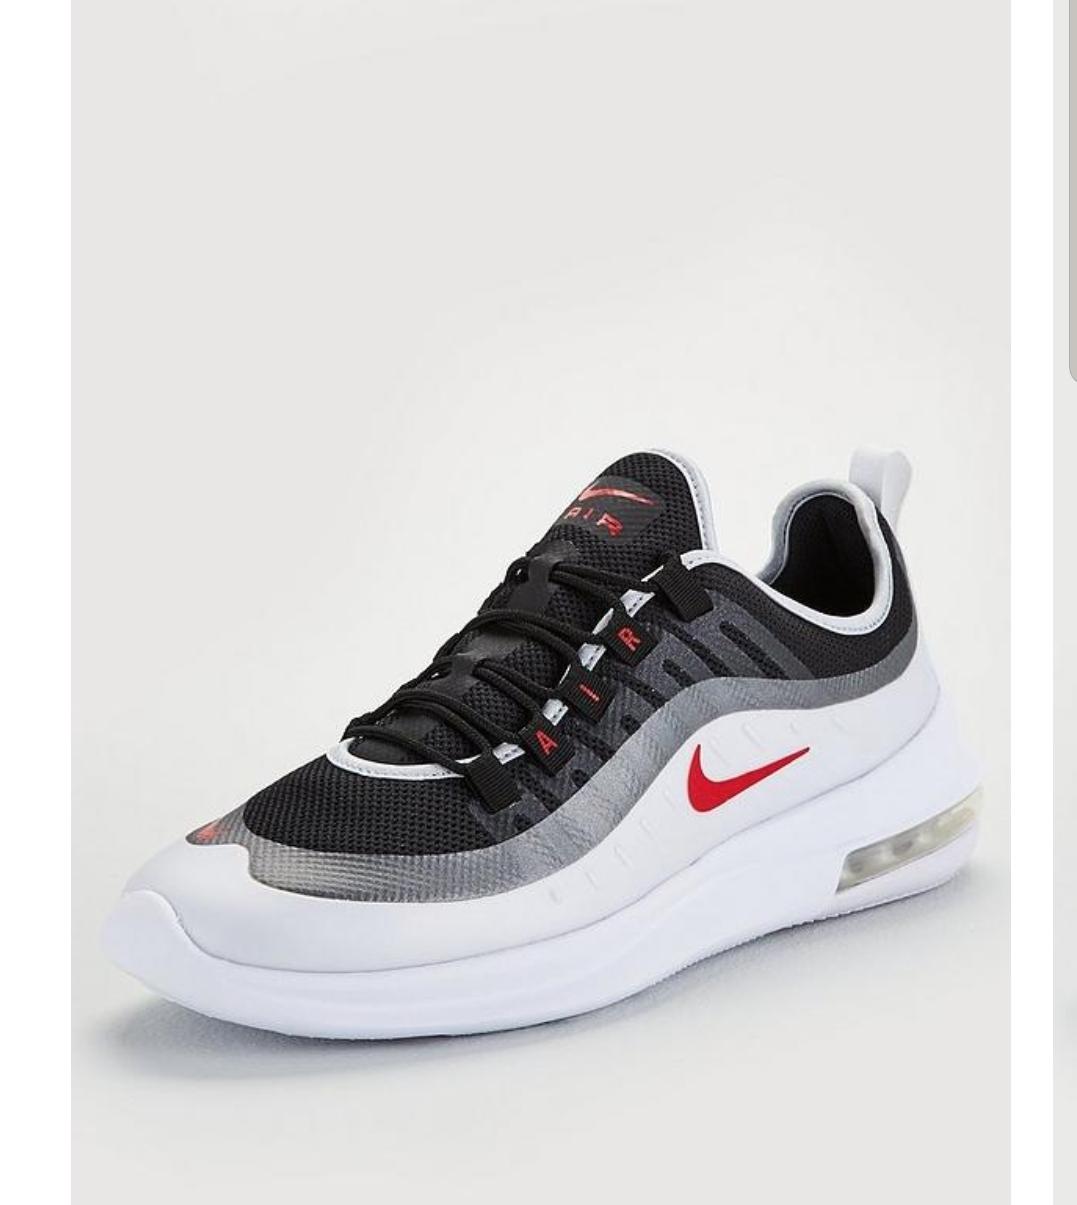 Nike Air Max Maxis in SK14 Tameside for £40.00 for sale | Shpock